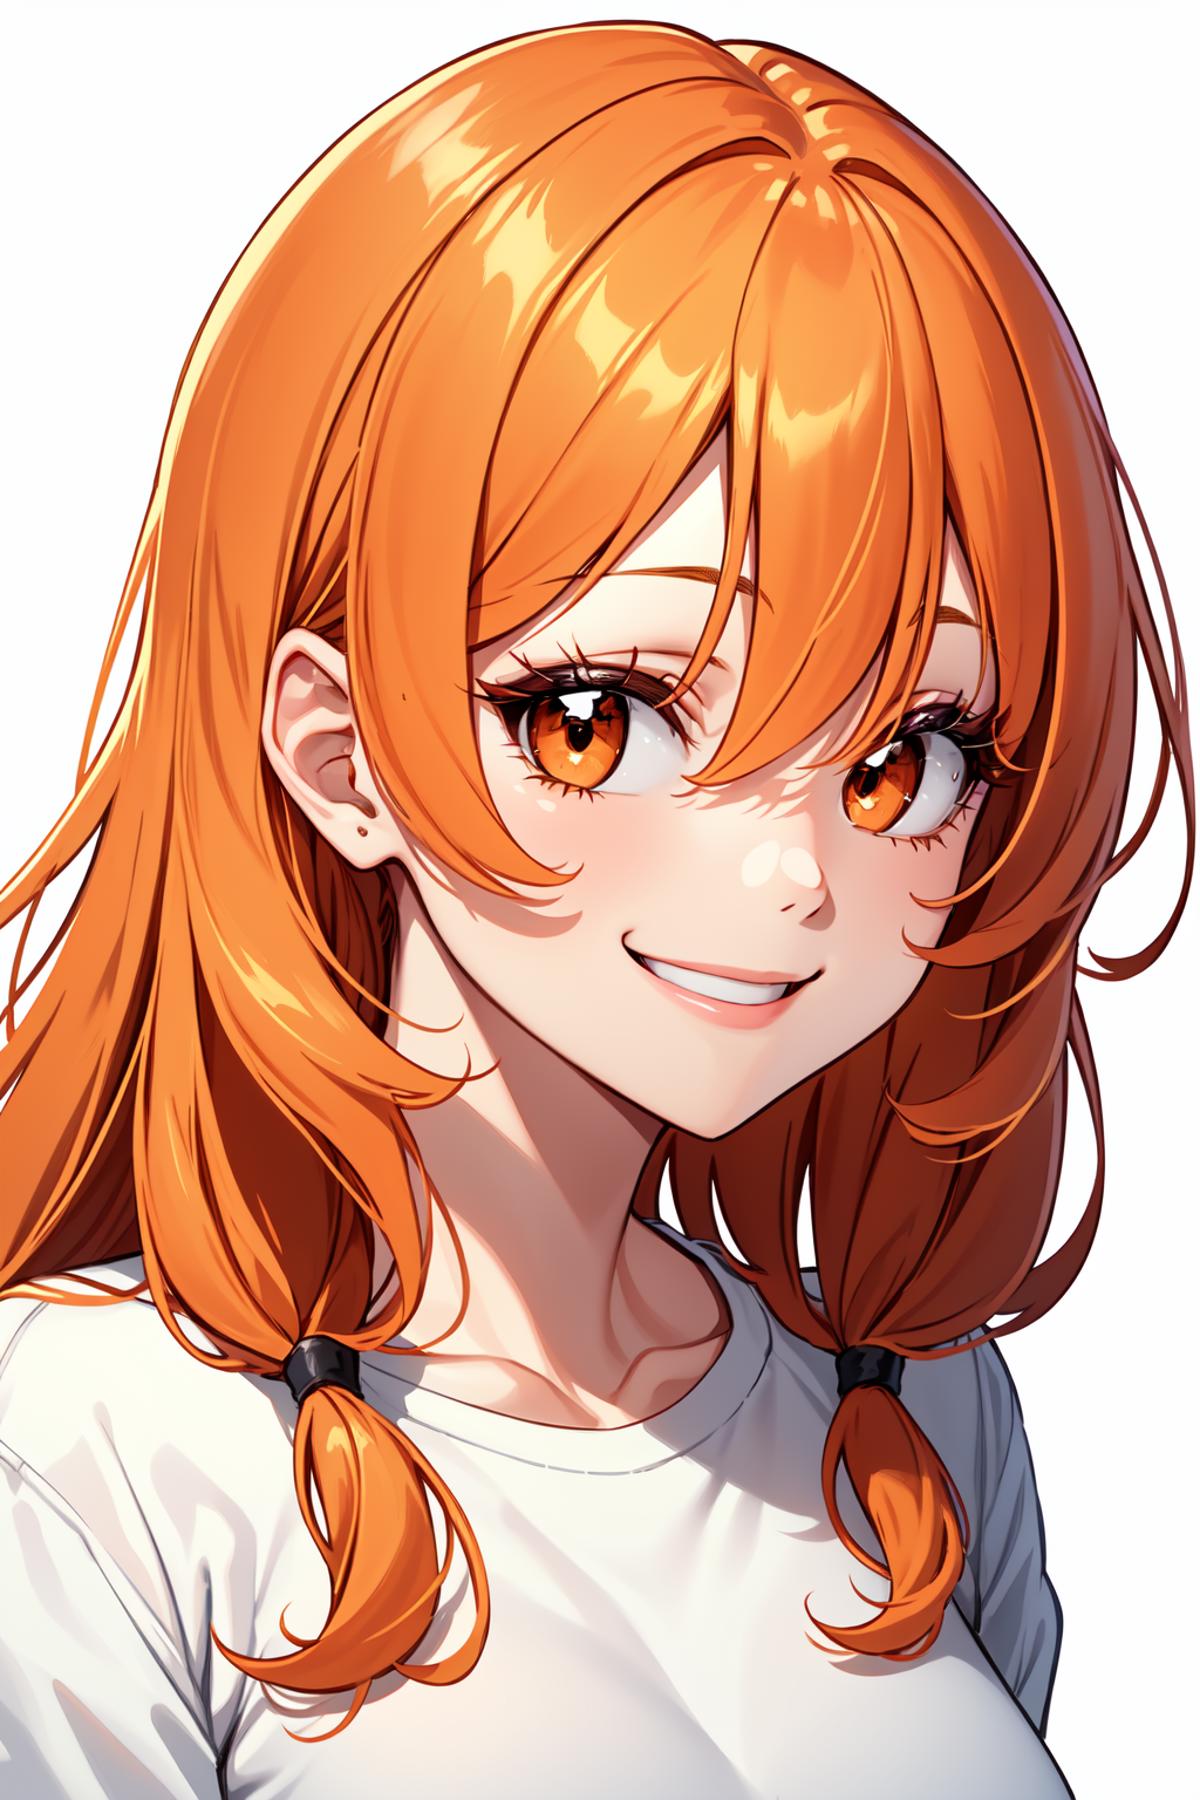 Orange Haired Anime Character with Red Eyes Smiling.